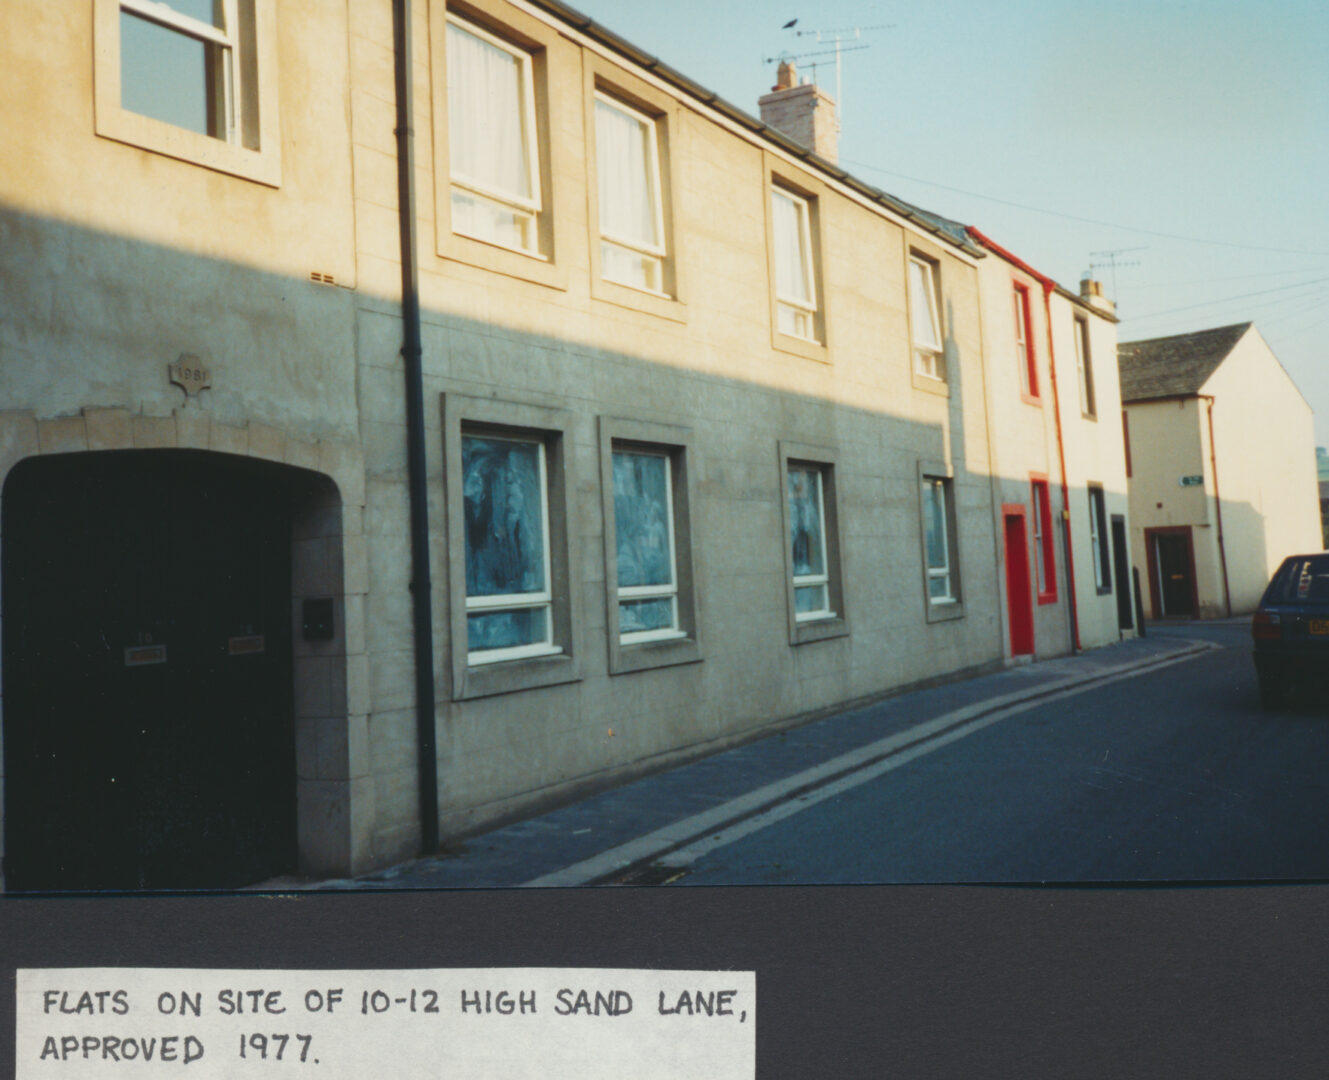 High Sand Lane flats on site of 10 12 High Sands Lane approved 1977 photo